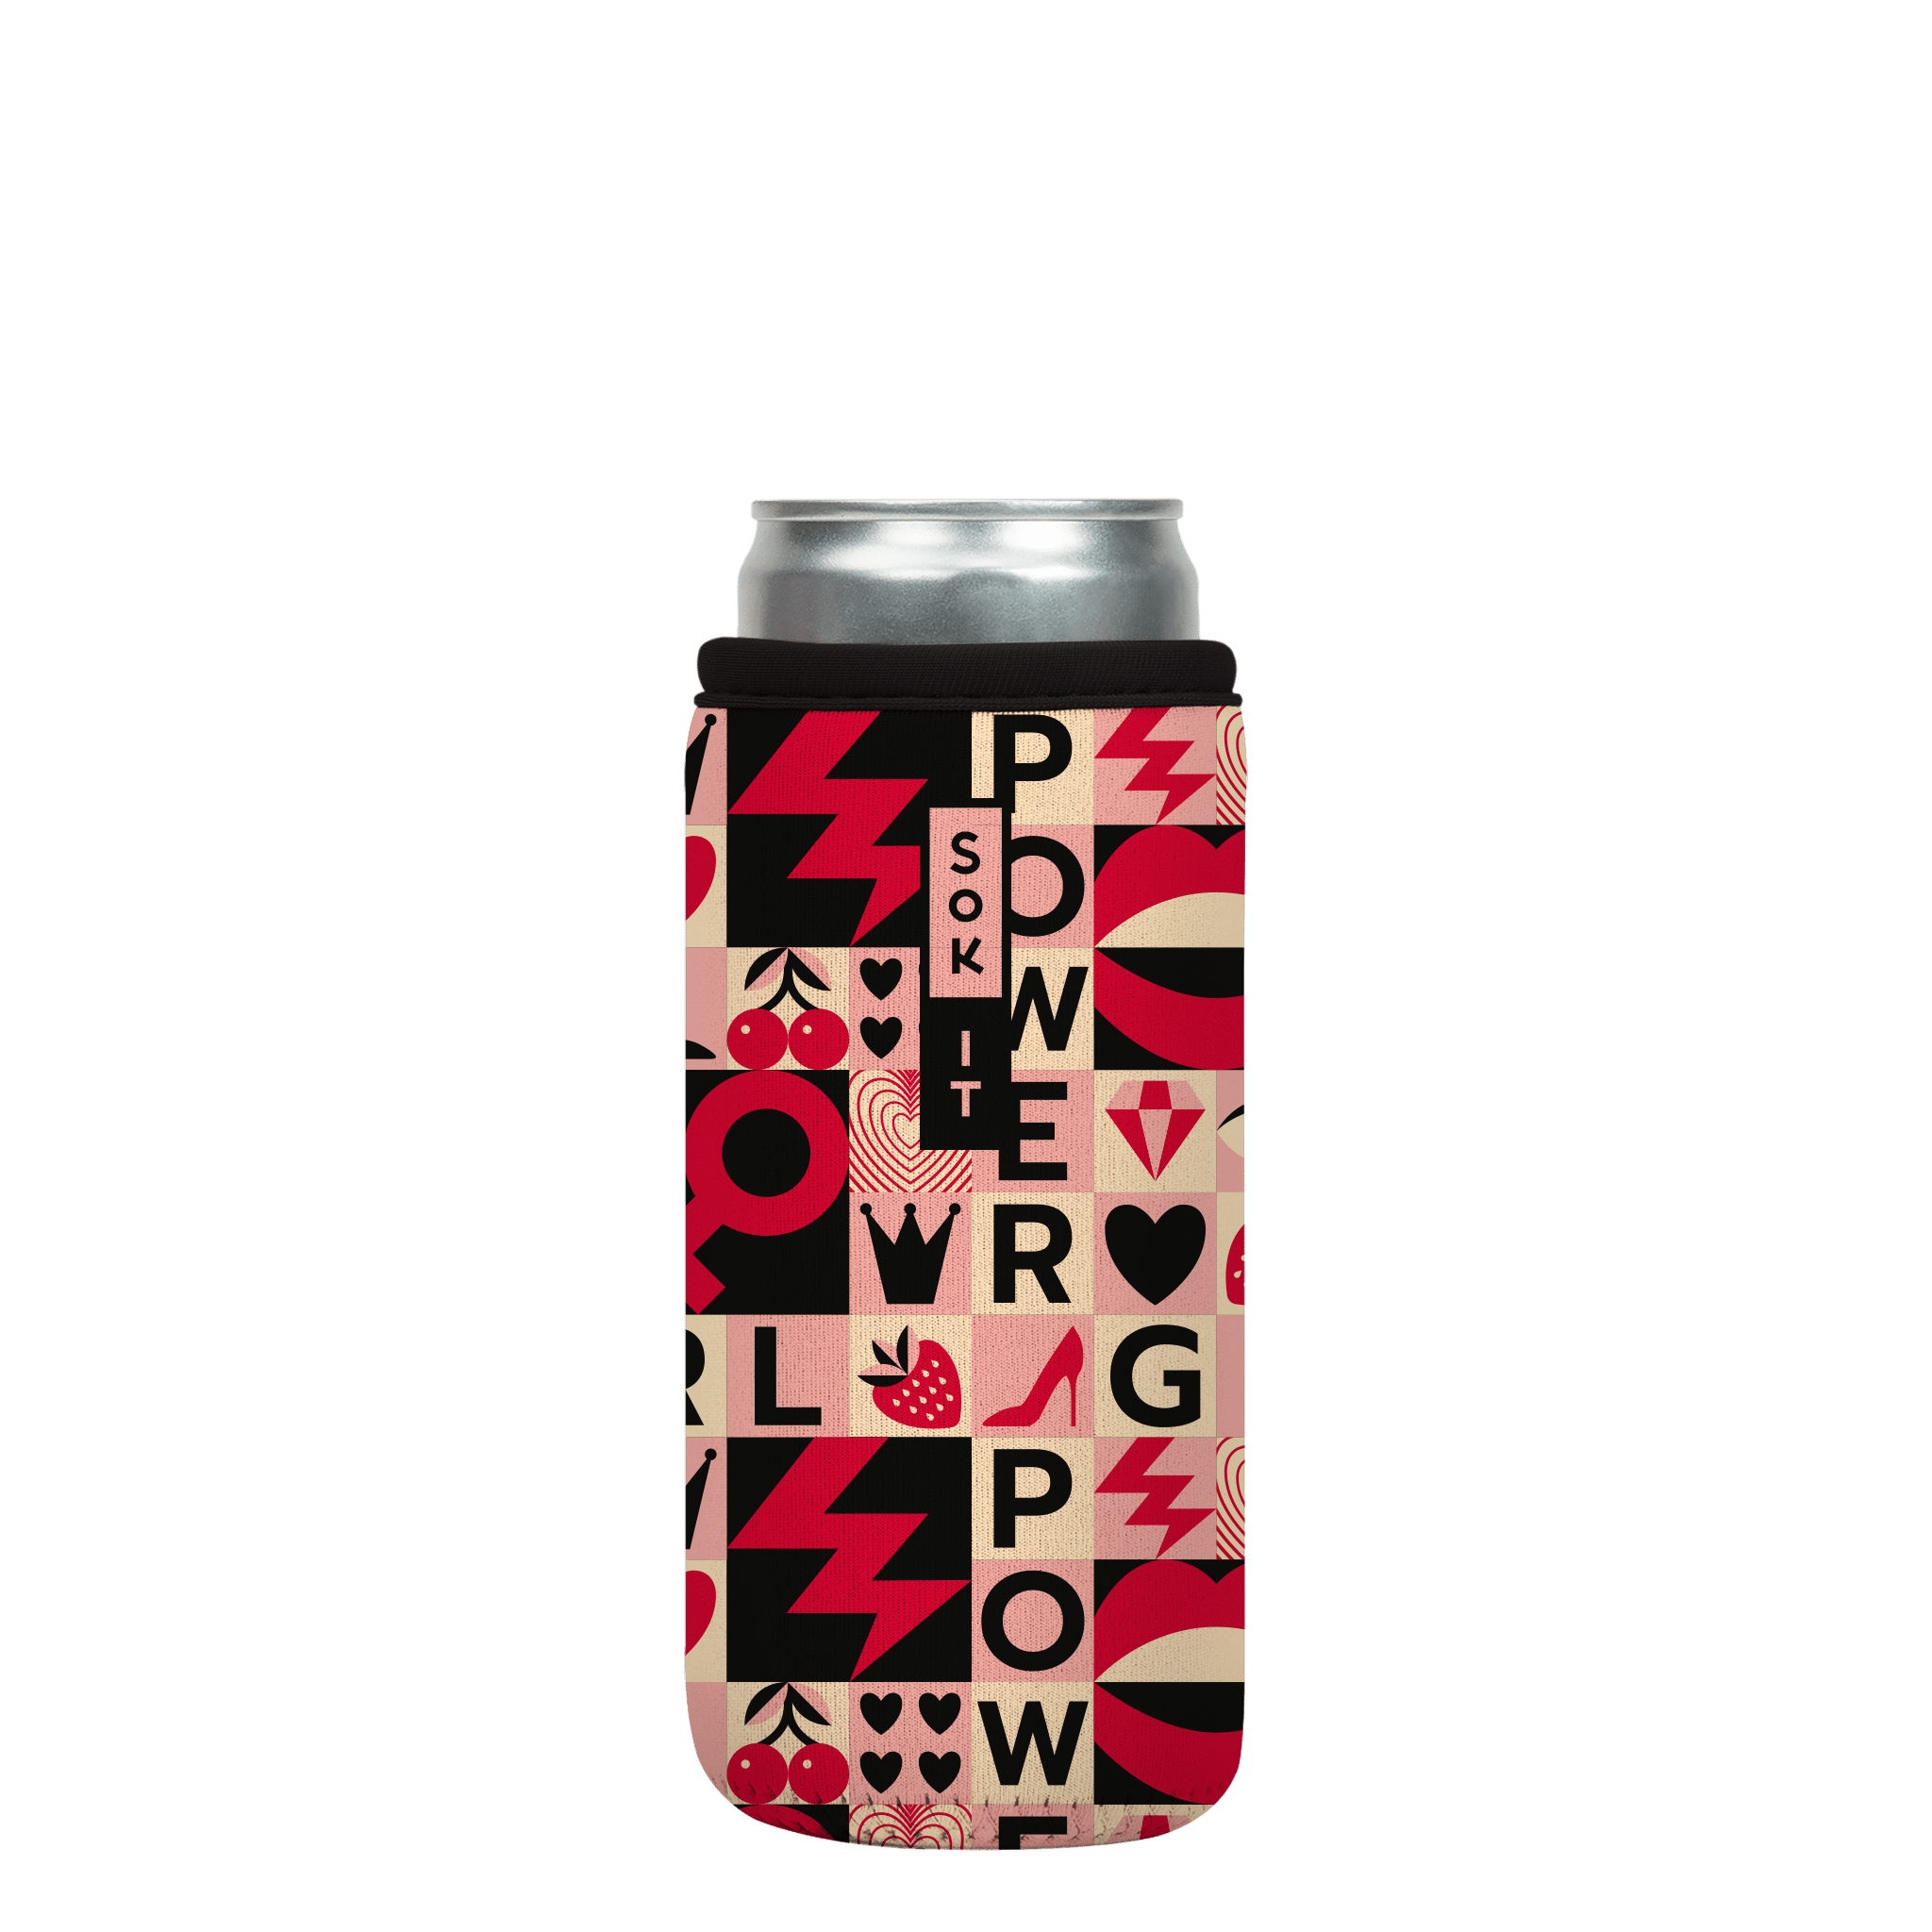 CanSok-Women Focused Girl Power 12oz Slim Can